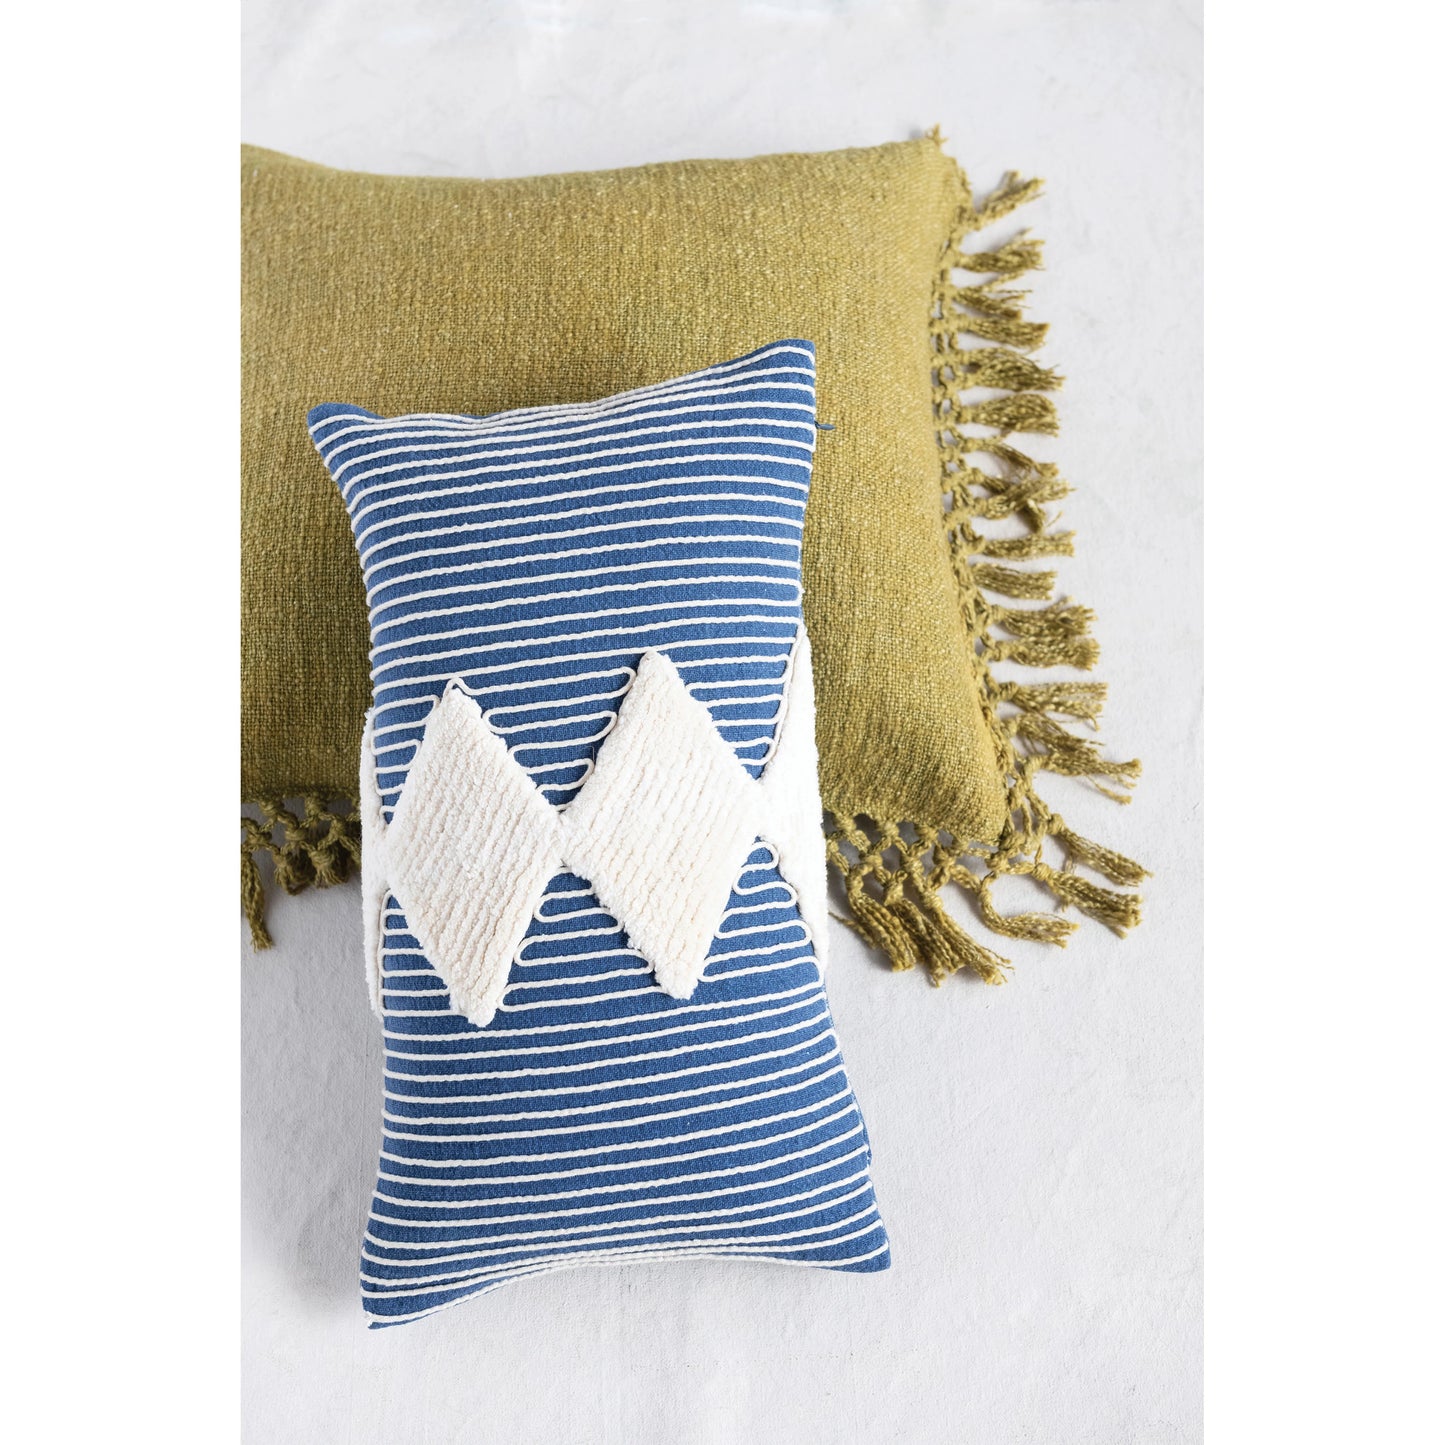 Cotton Tufted Lumbar Pillow with Embroidered Rope Stripes